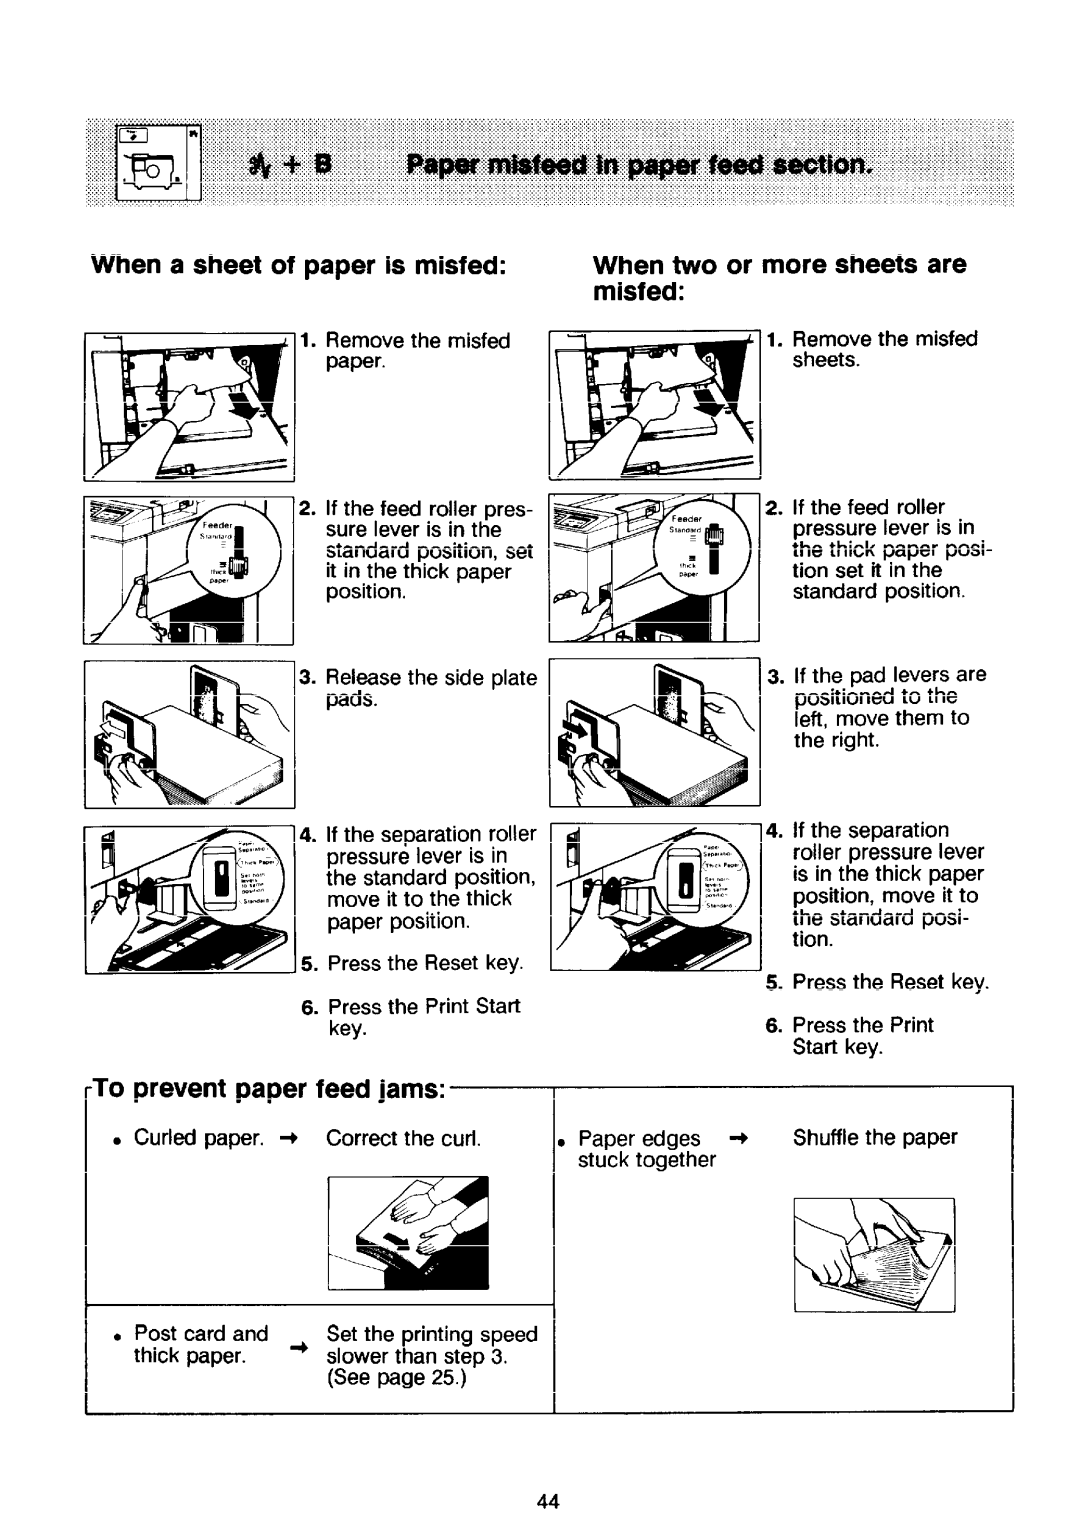 Ricoh PRIPORT VT2130 manual When a sheet, of paper is misfed, When two or more sheets are, To prevent paper feed jams 